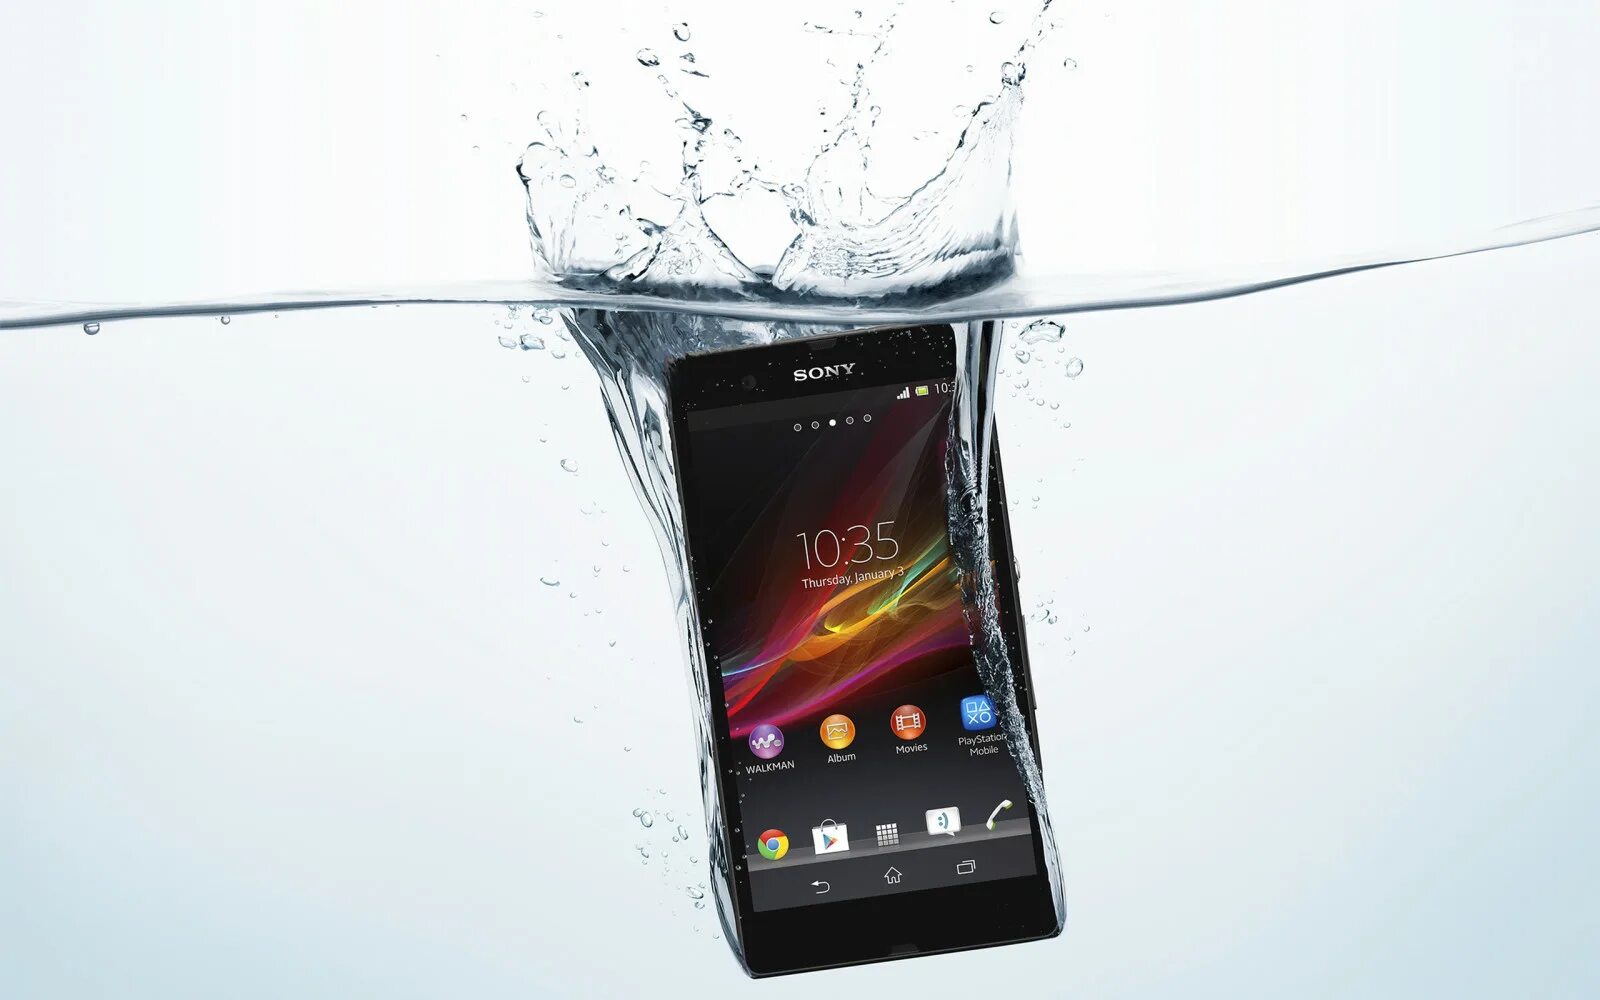 Sony Xperia z 2013. Водонепроницаемый Sony Xperia 2013. Sony Xperia 2013. Телефон сони Xperia z Водонепроницаемый.